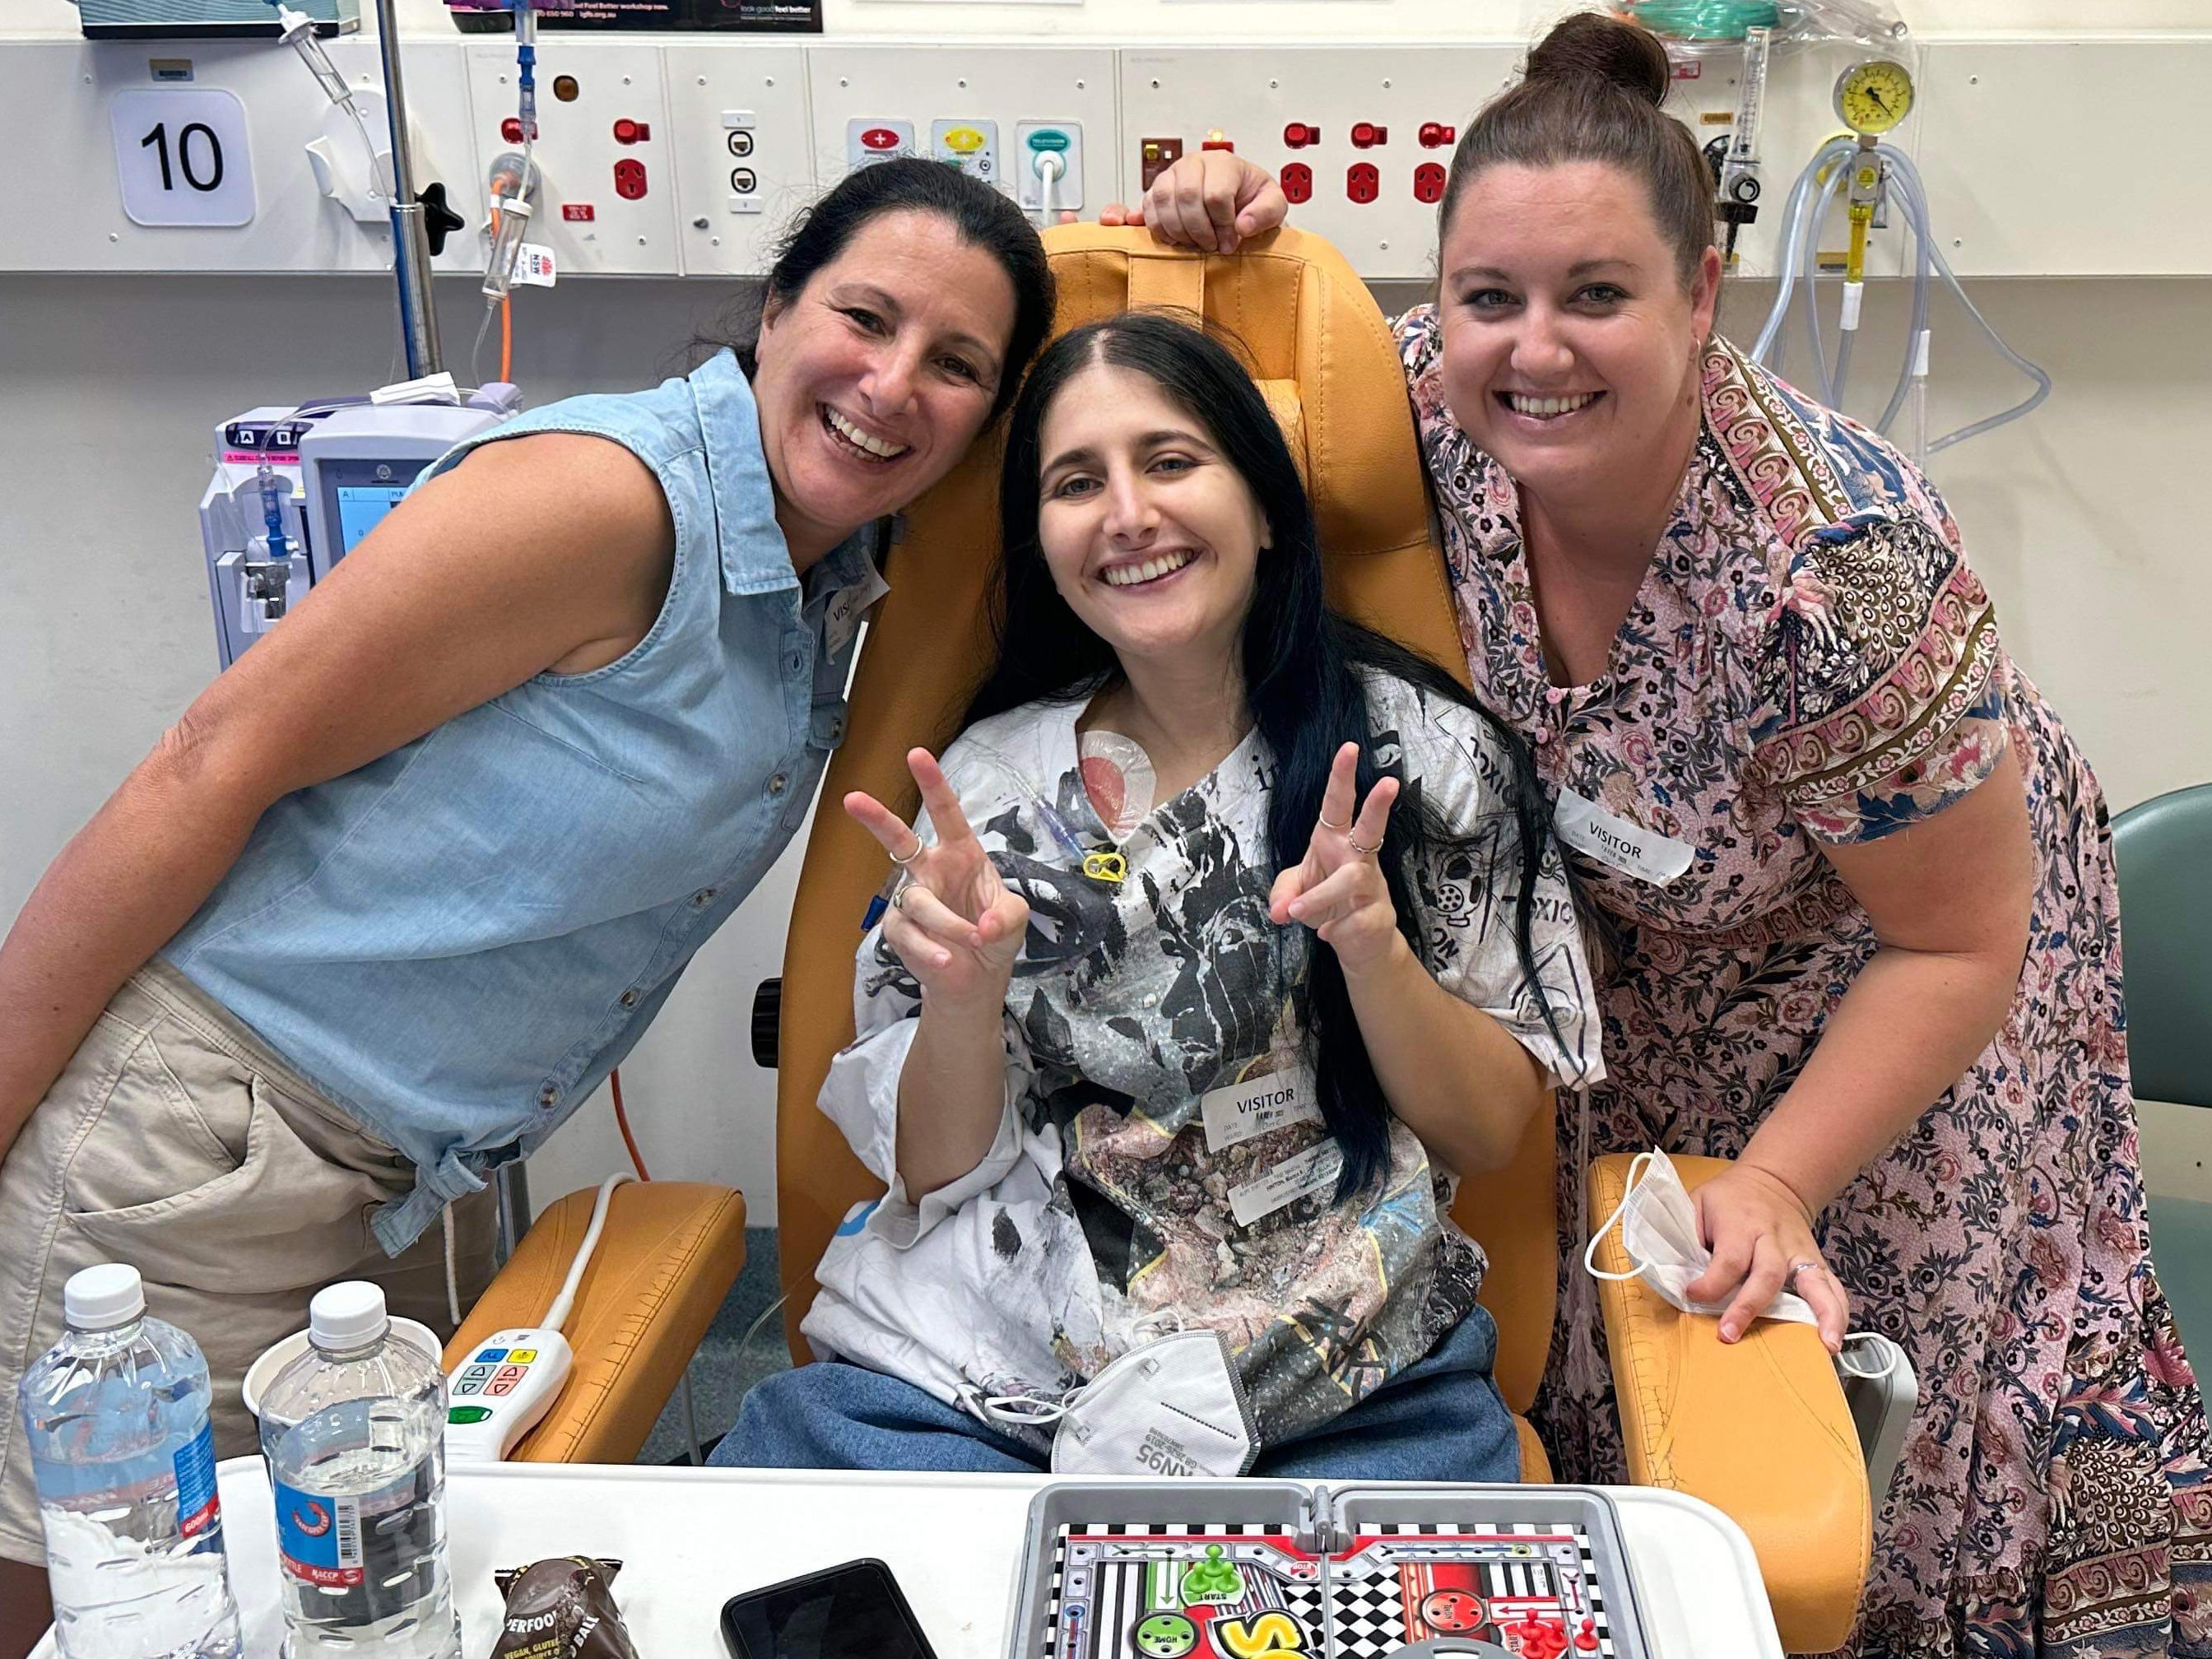 B﻿ianca Hinton, 25, was on a cruise with her family when she felt a lump in her breast while getting dried after a shower.She thought it was probably a cyst, but headed to her GP as soon as she could.﻿
Just a few weeks later, she was starting chemotherapy for breast cancer.﻿